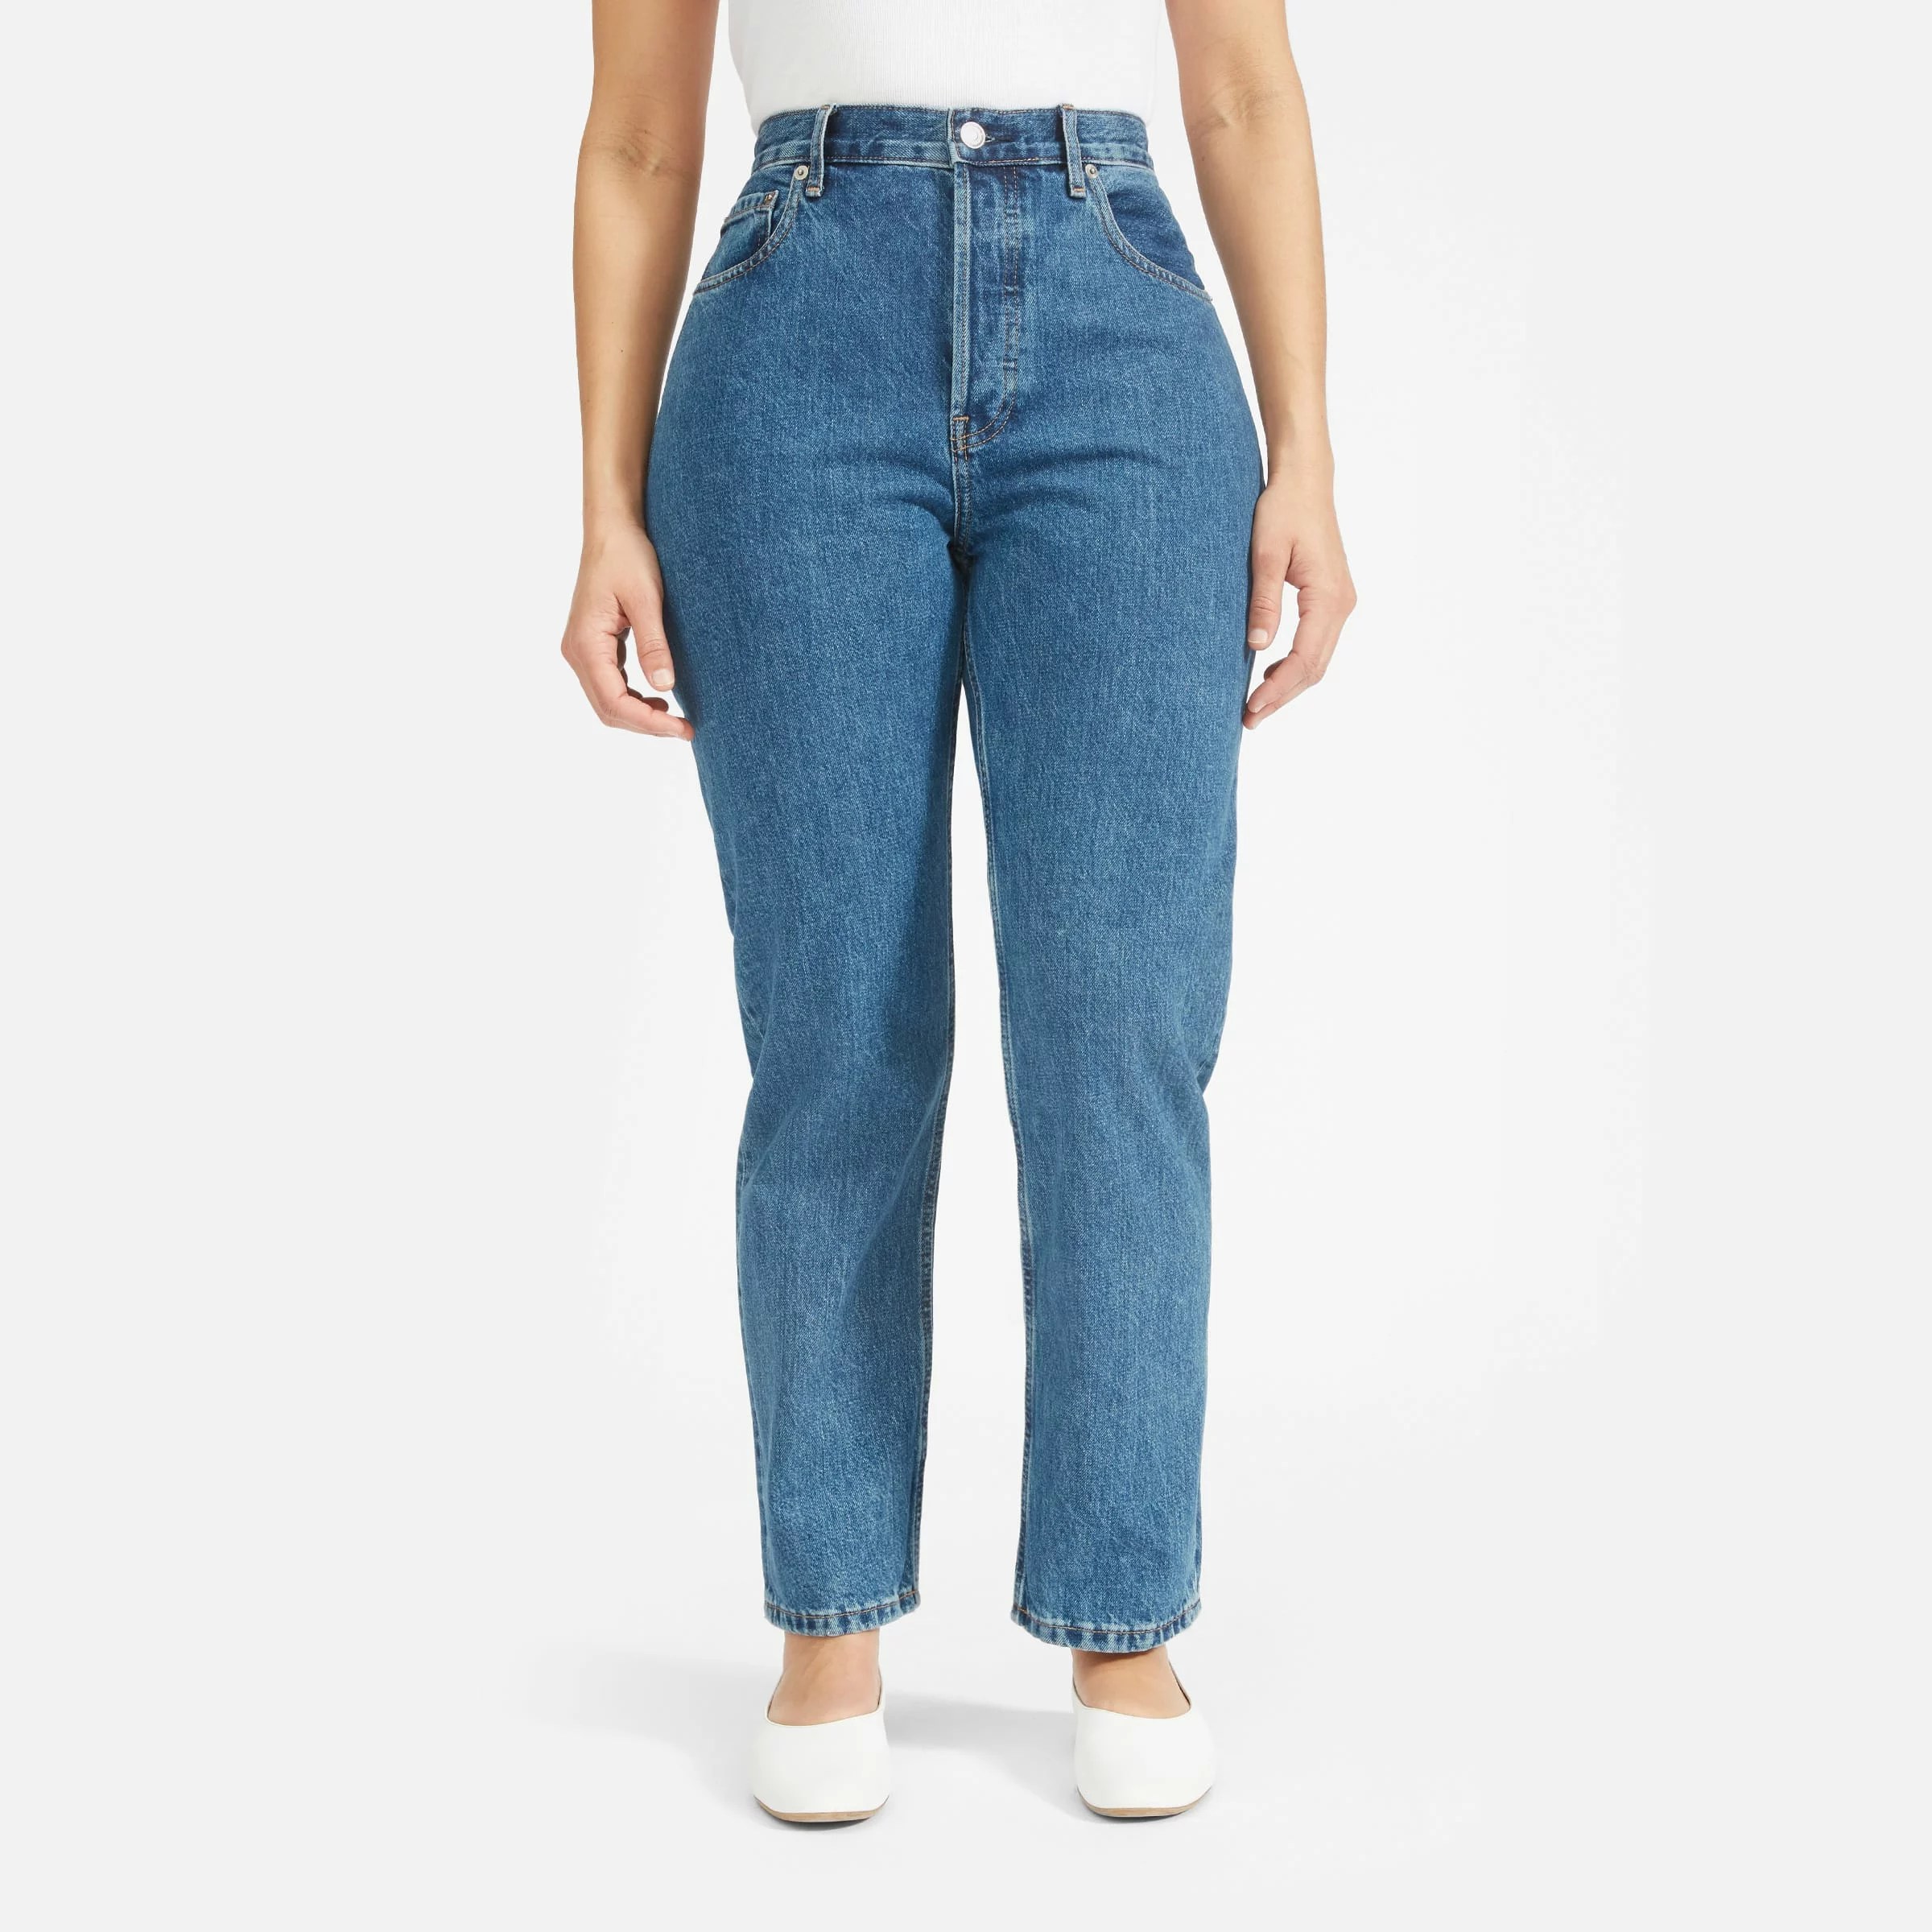 15 Best Pairs of Jeans 2023 |